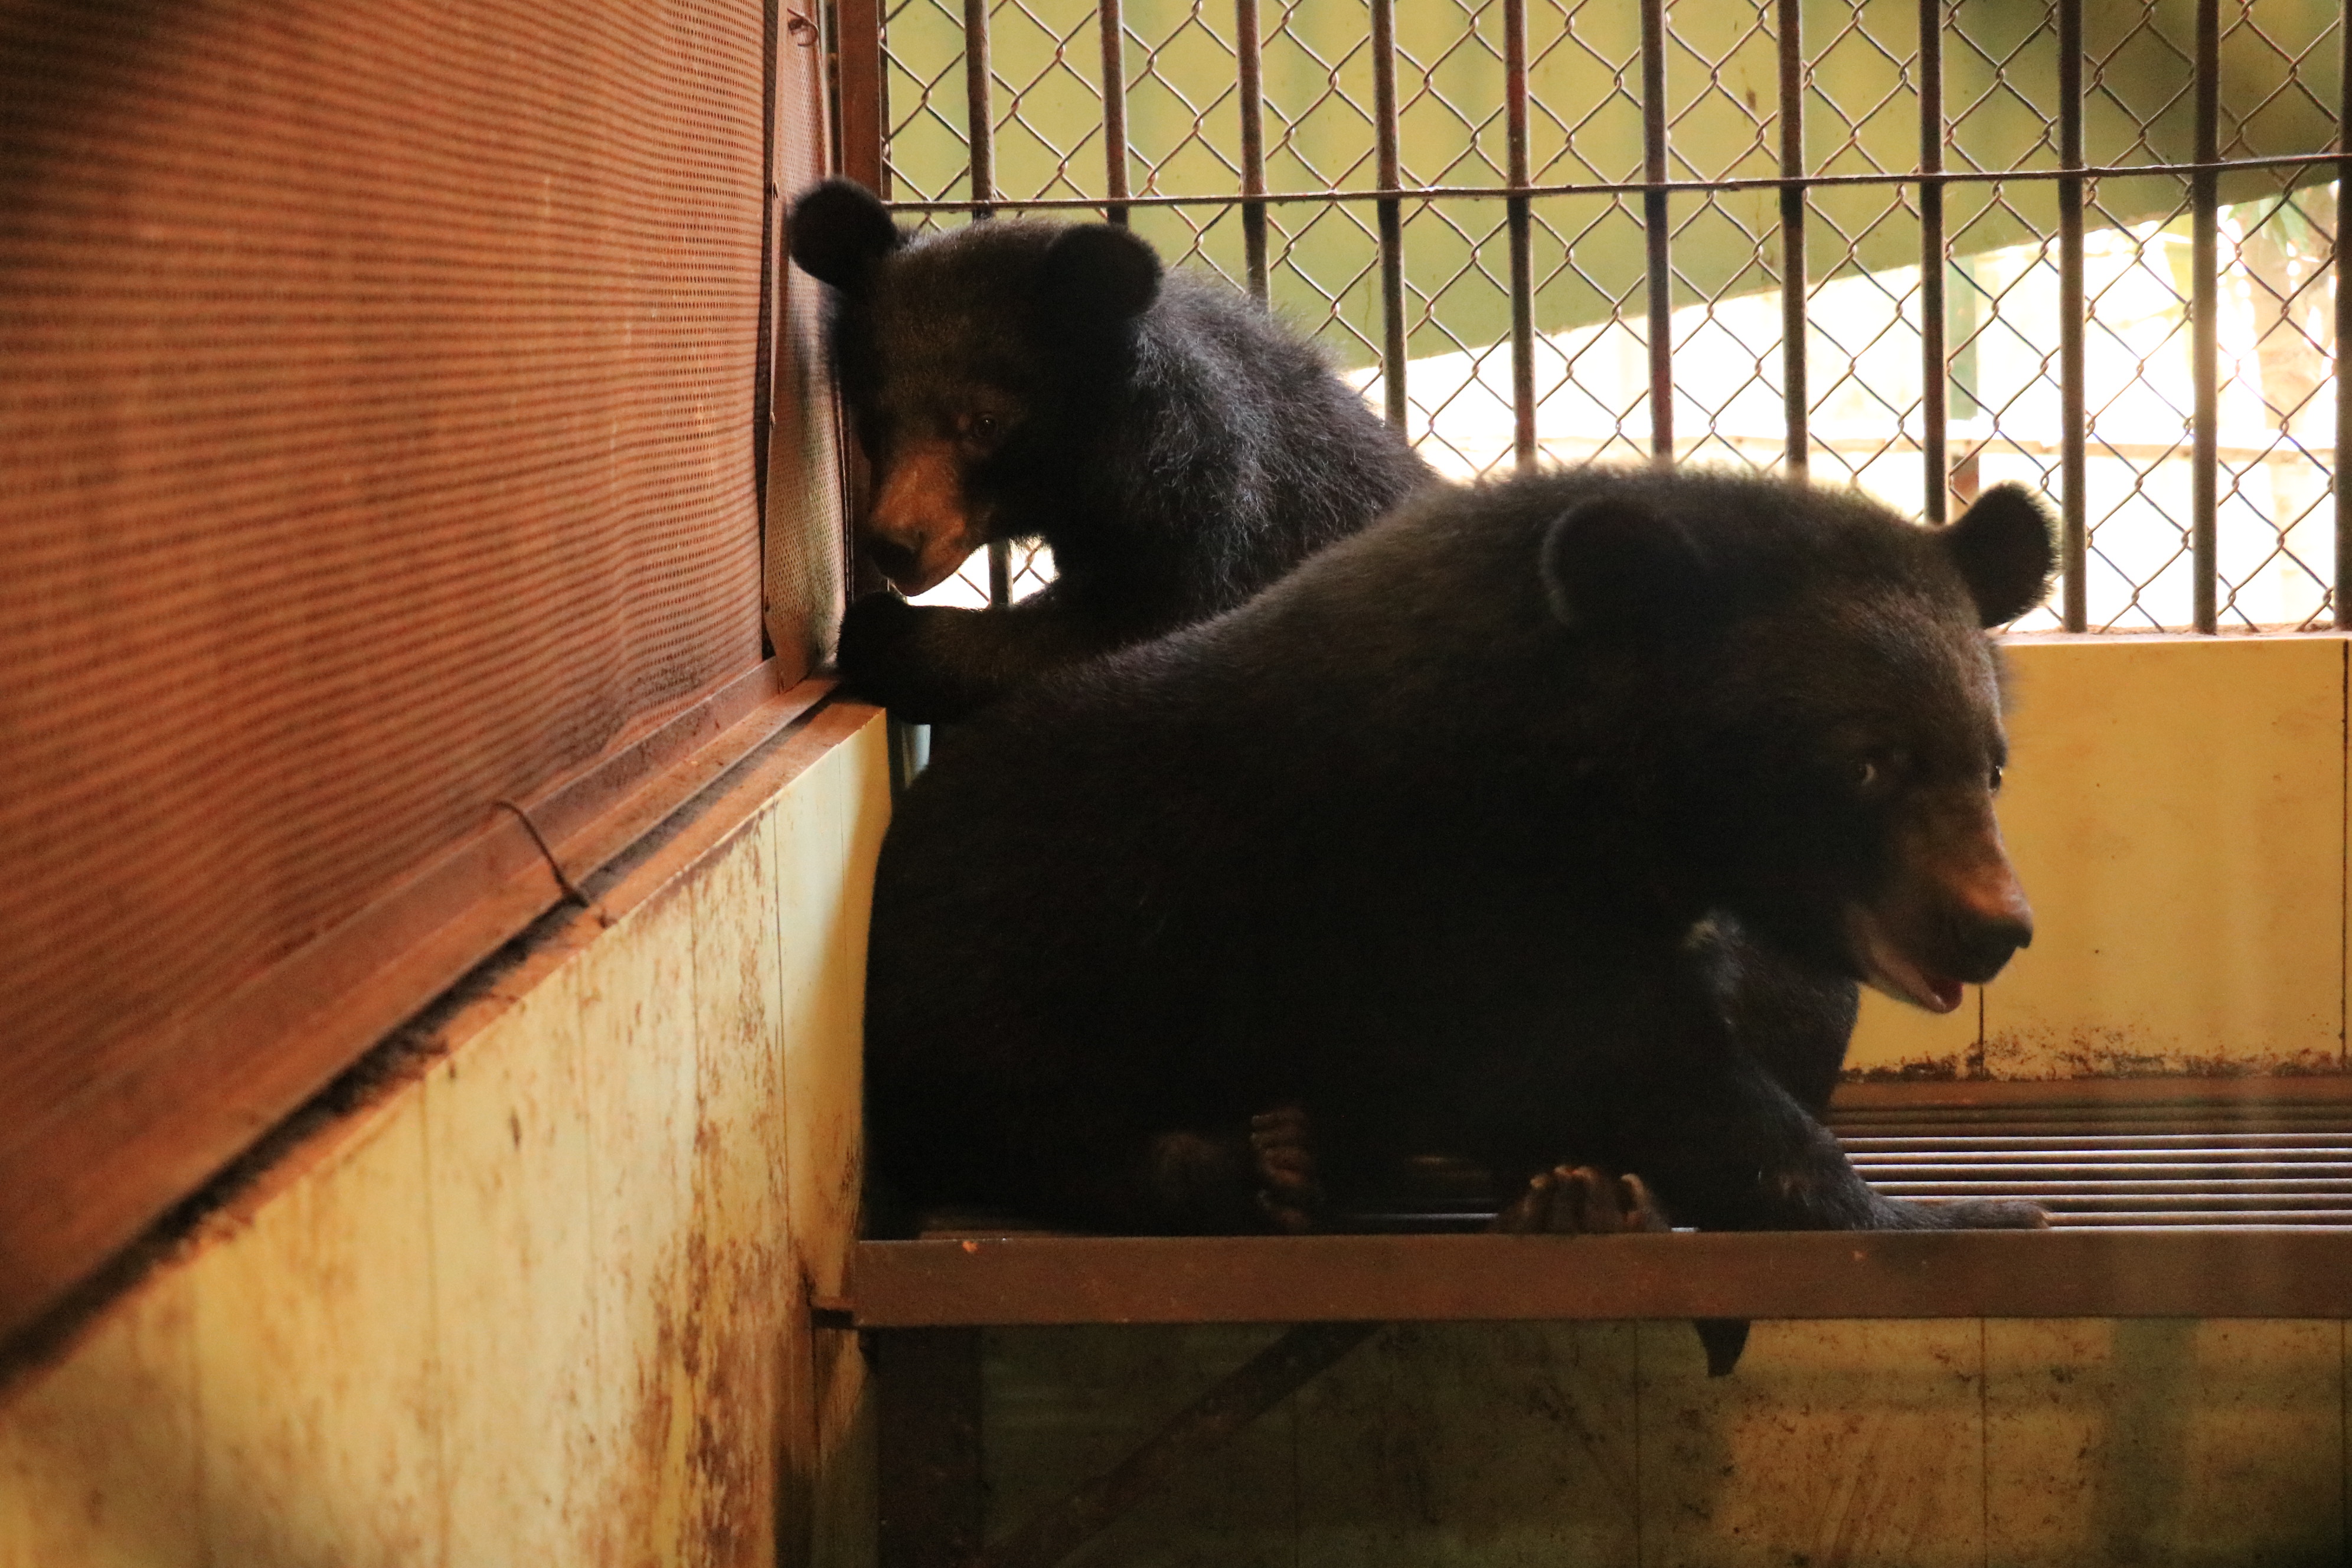 Moon bears rescued from circus